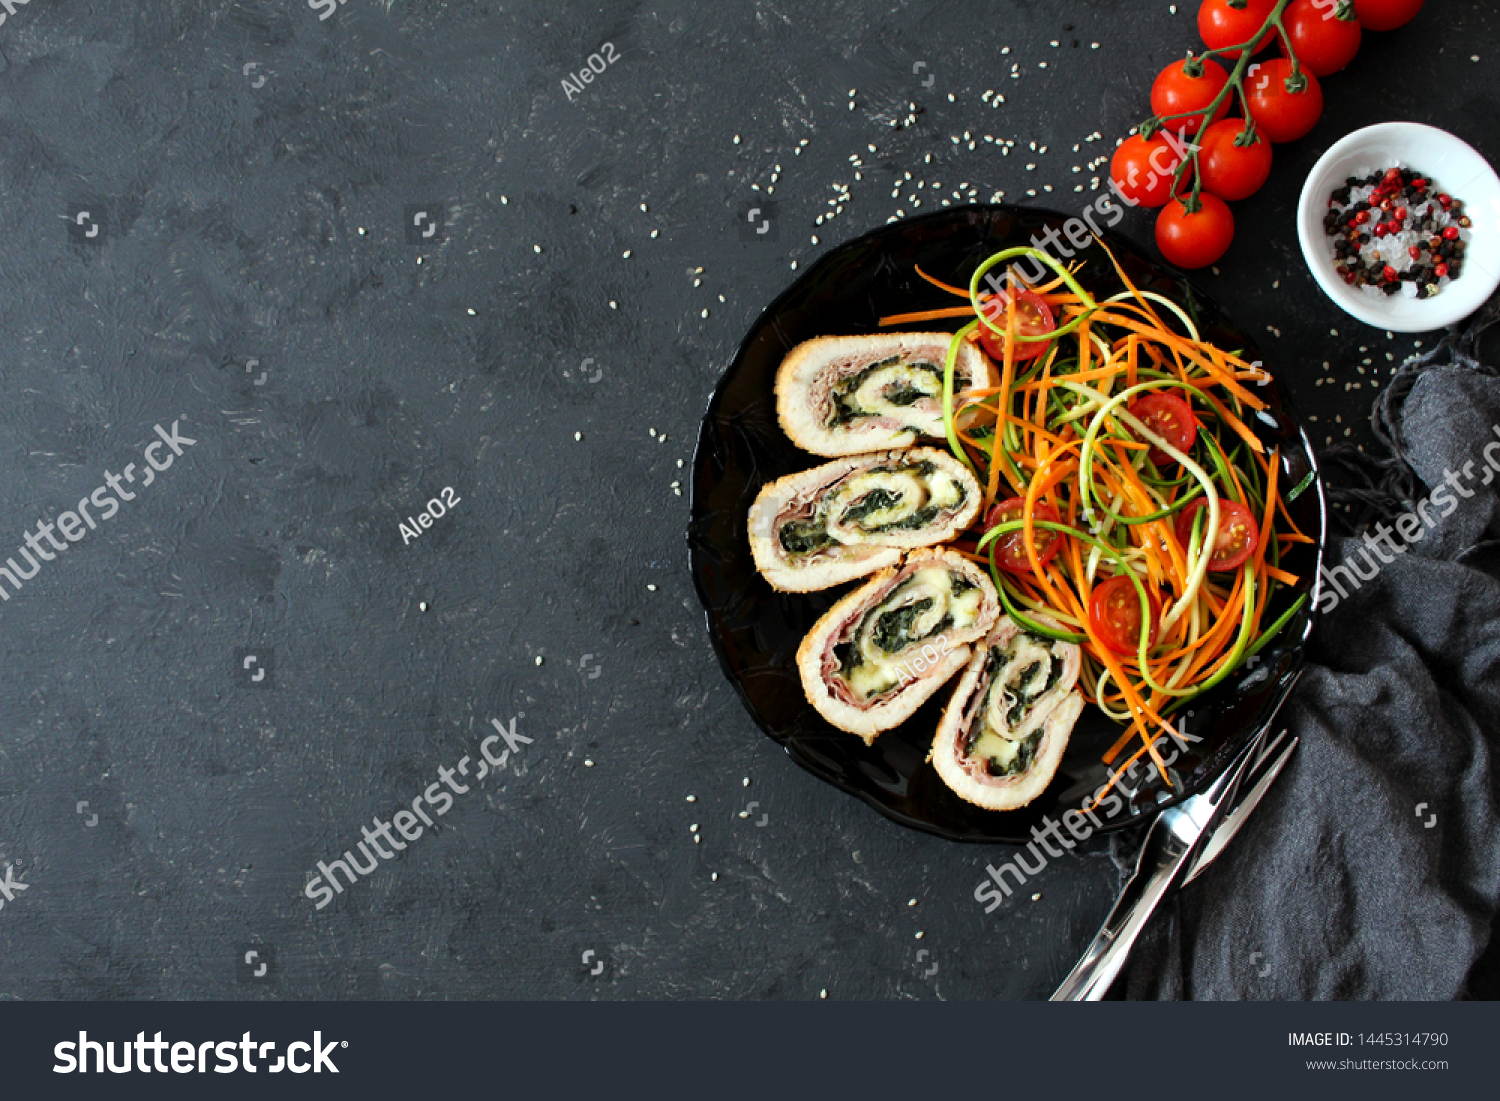 Chicken stuffed with ham, spinach and cheese served with fresh salad on dark background. Top view with copy space. #1445314790